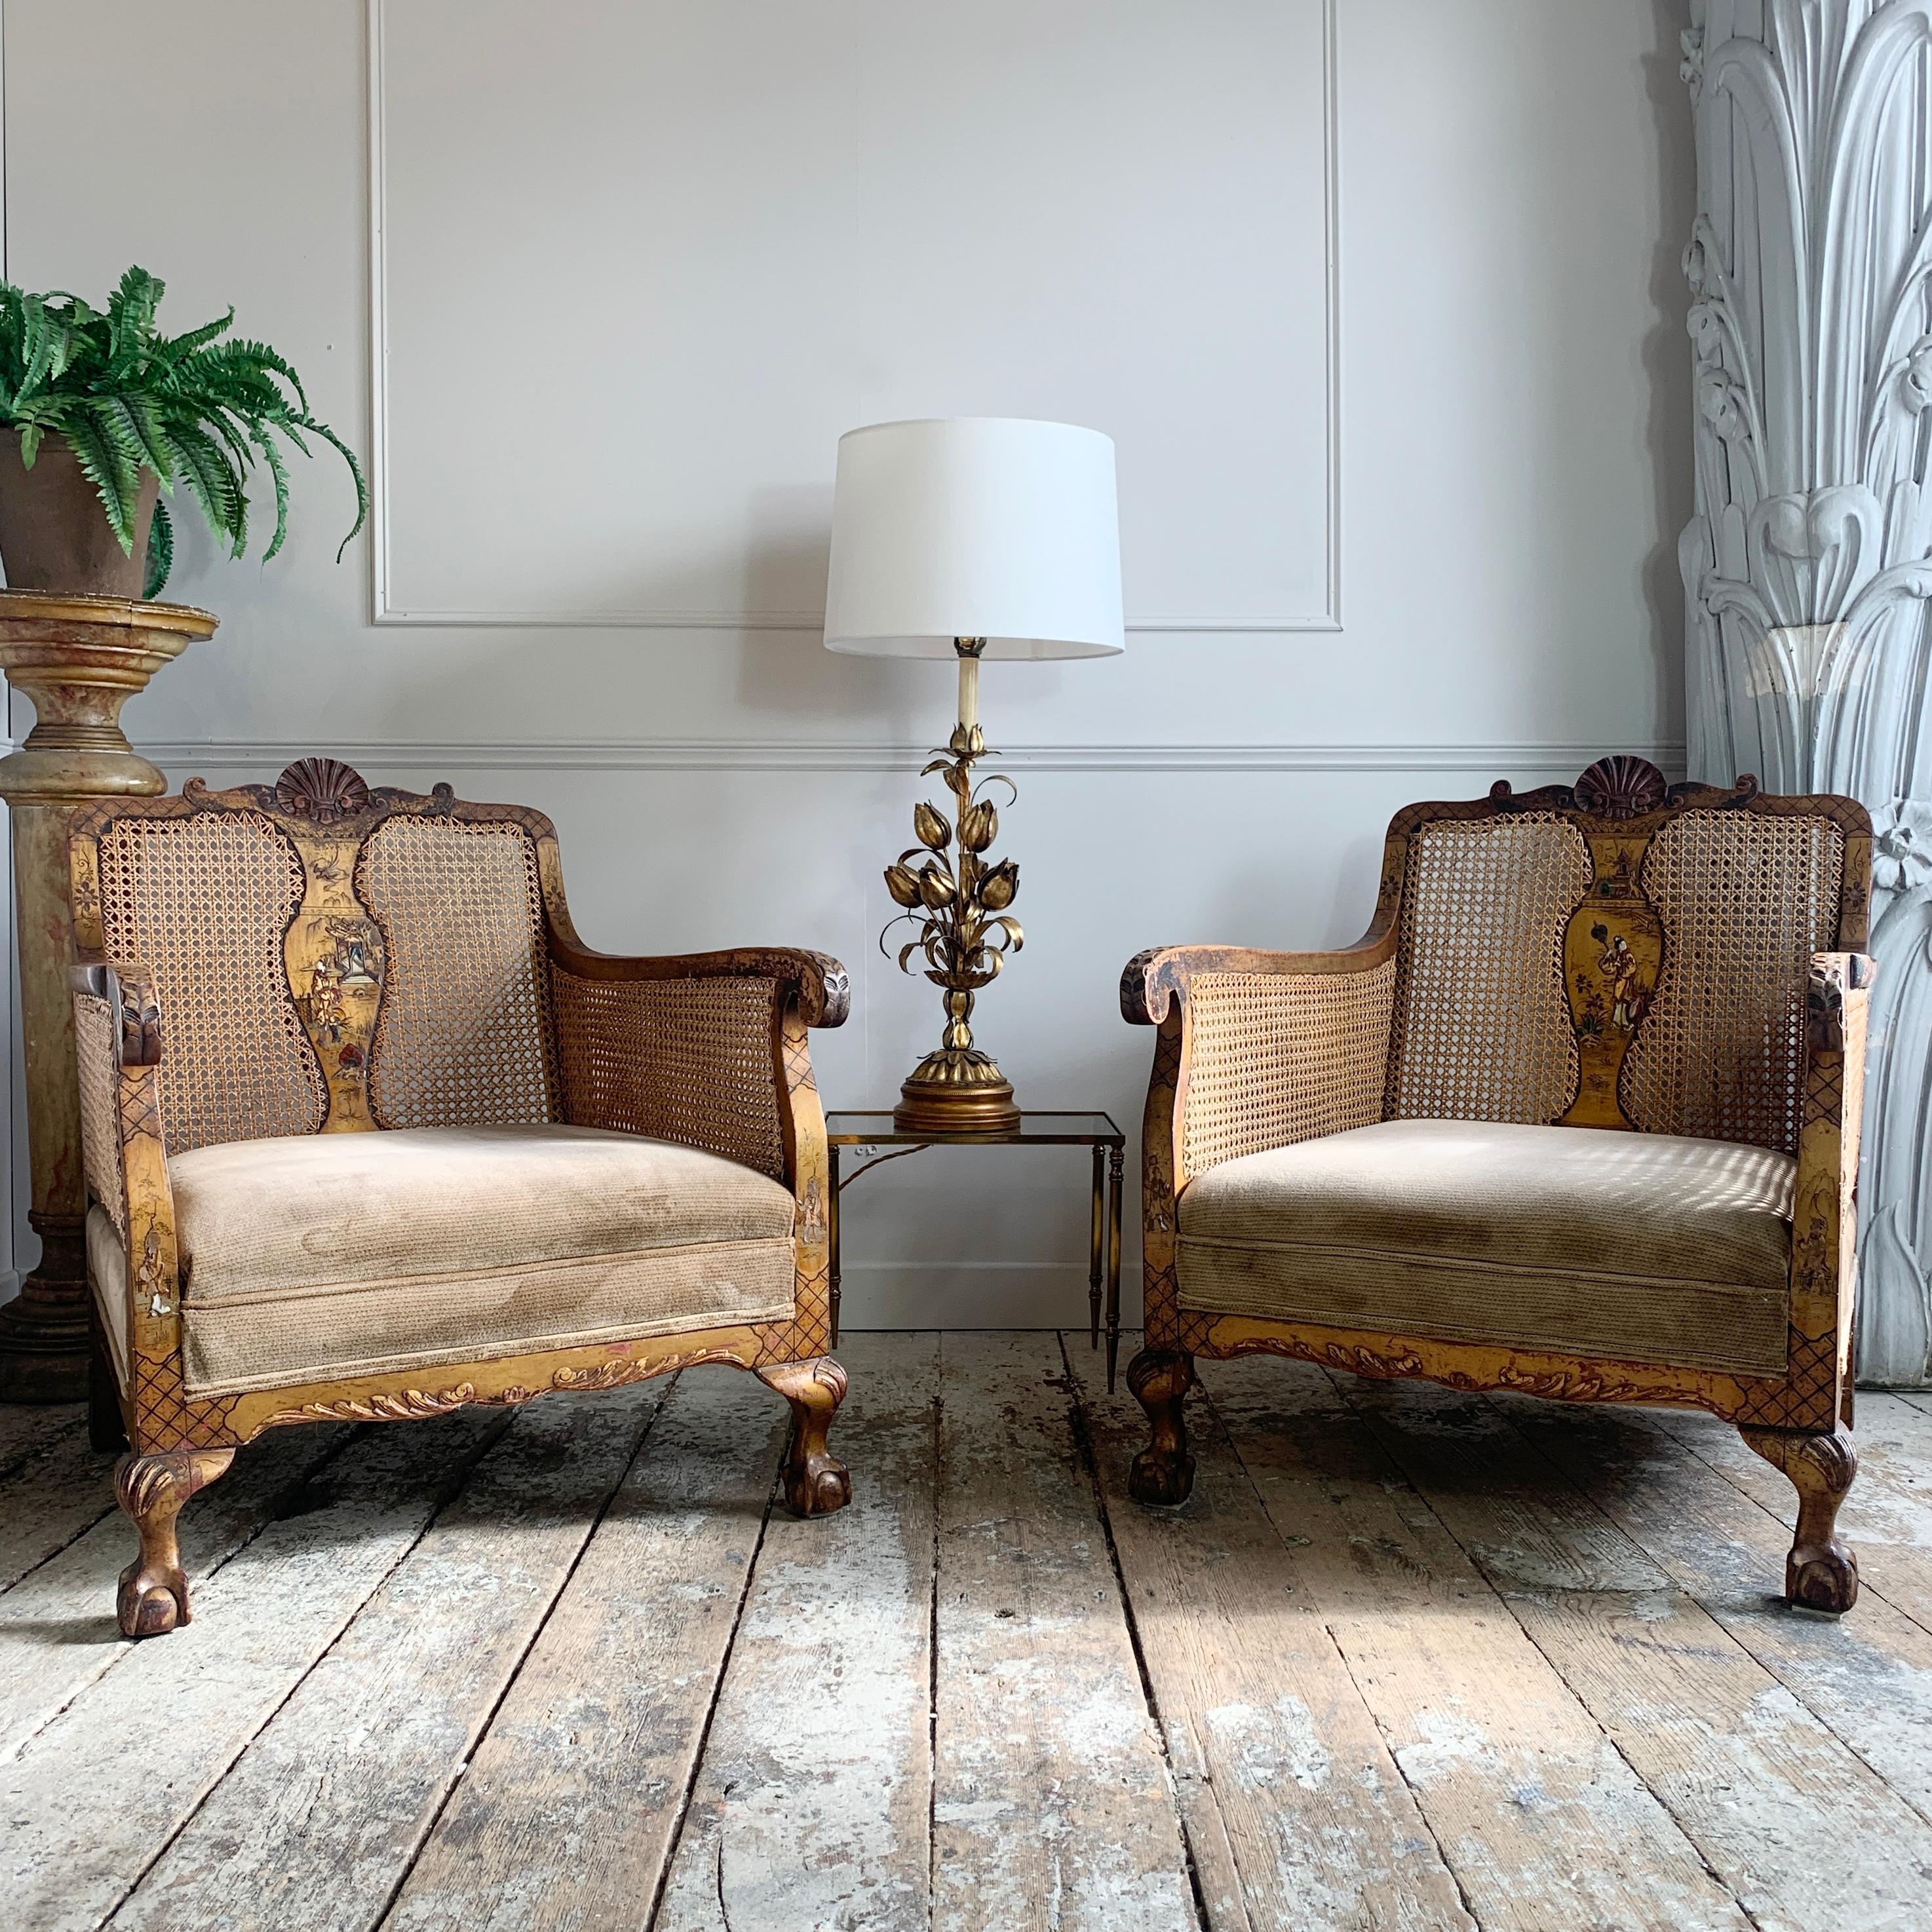 An exceptional and rare antique English later Victorian chinoiserie three-piece wooden bergere cane suite, circa 1885, in excellent antique condition. The suite is comprised of a three-seat settee with two matching armchairs and is constructed of